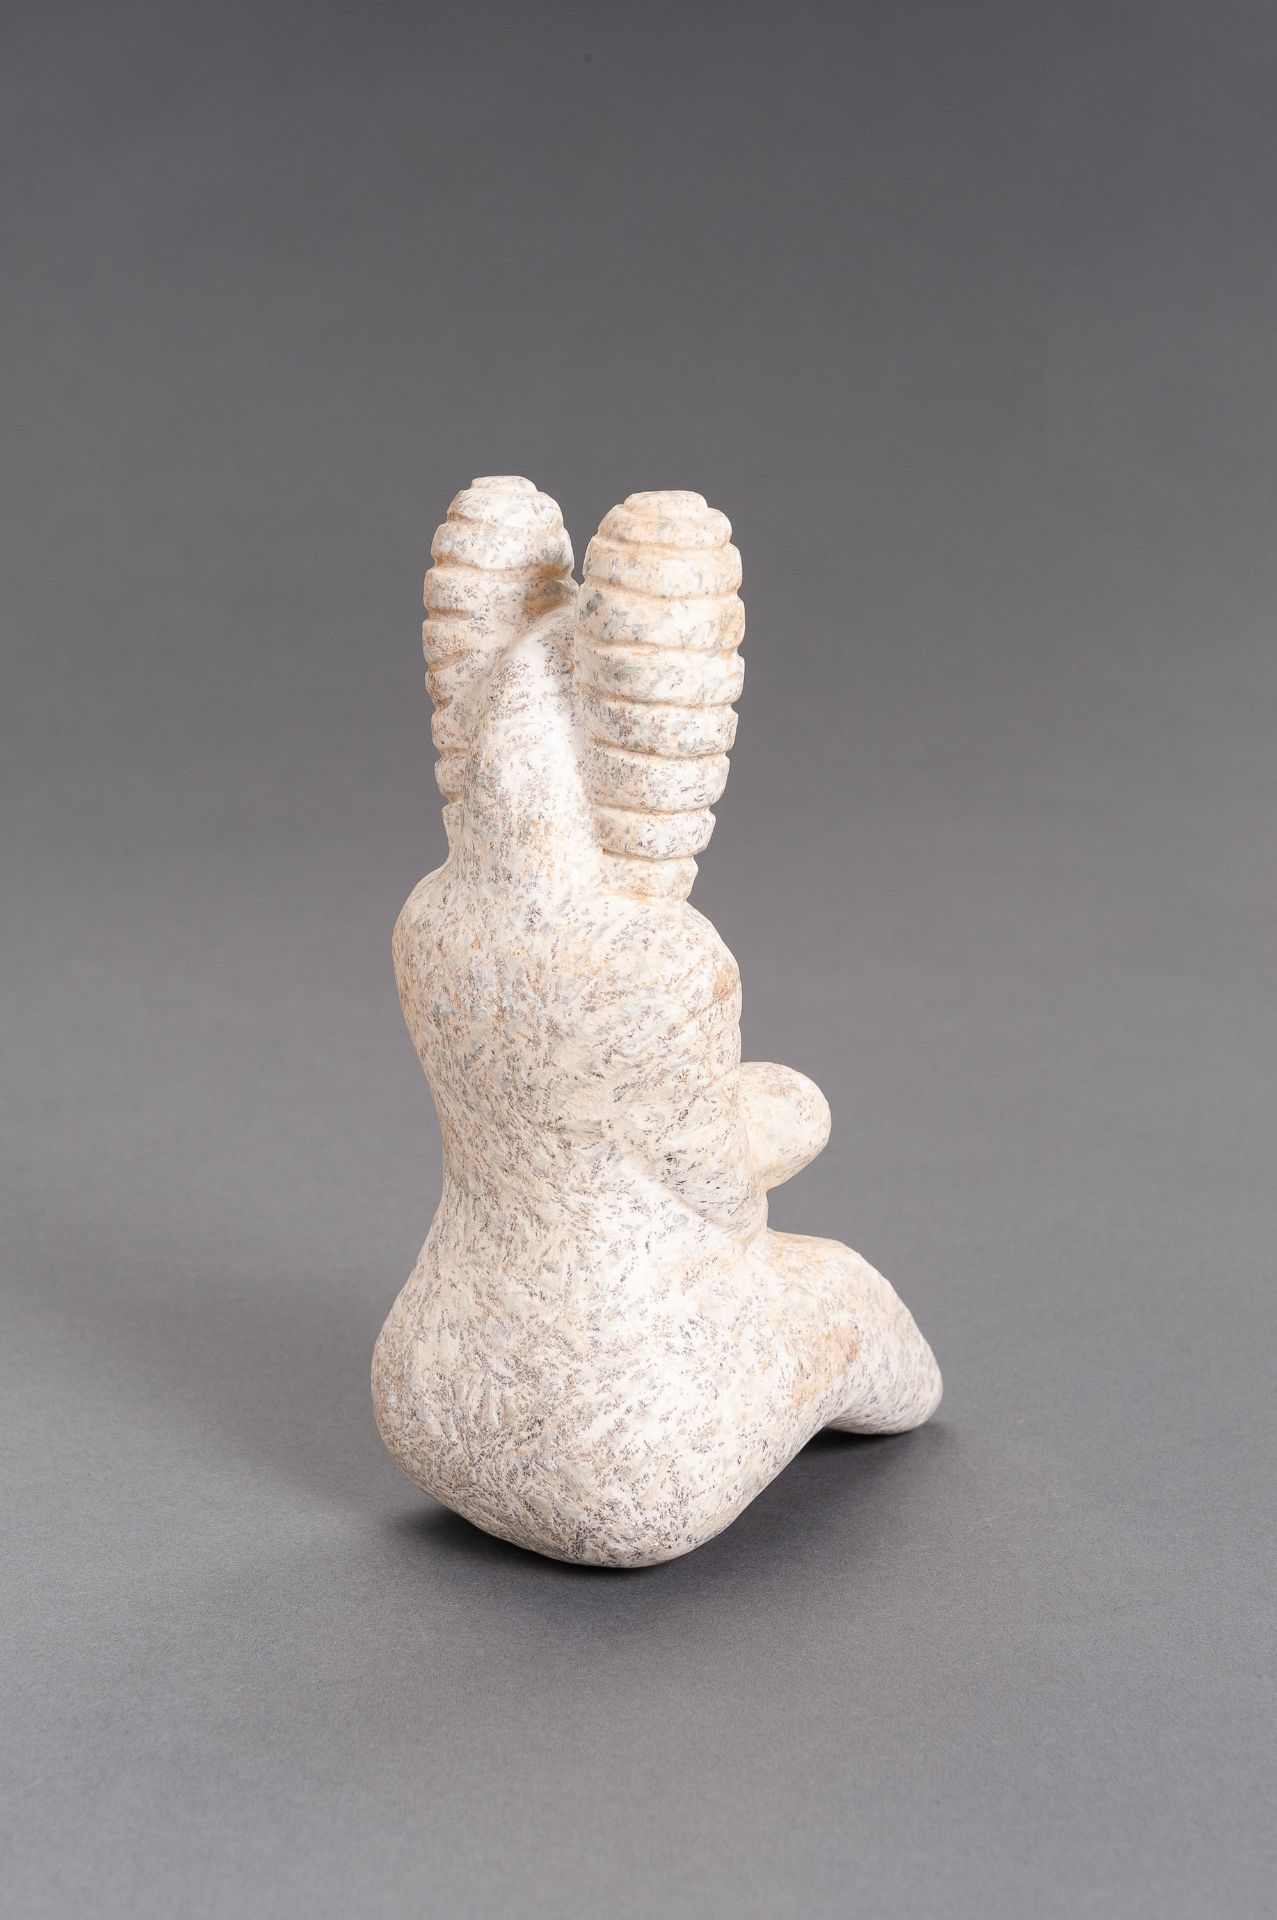 A STONE INDUS VALLEY STYLE FIGURE OF A FERTILITY GODDESS - Image 7 of 9